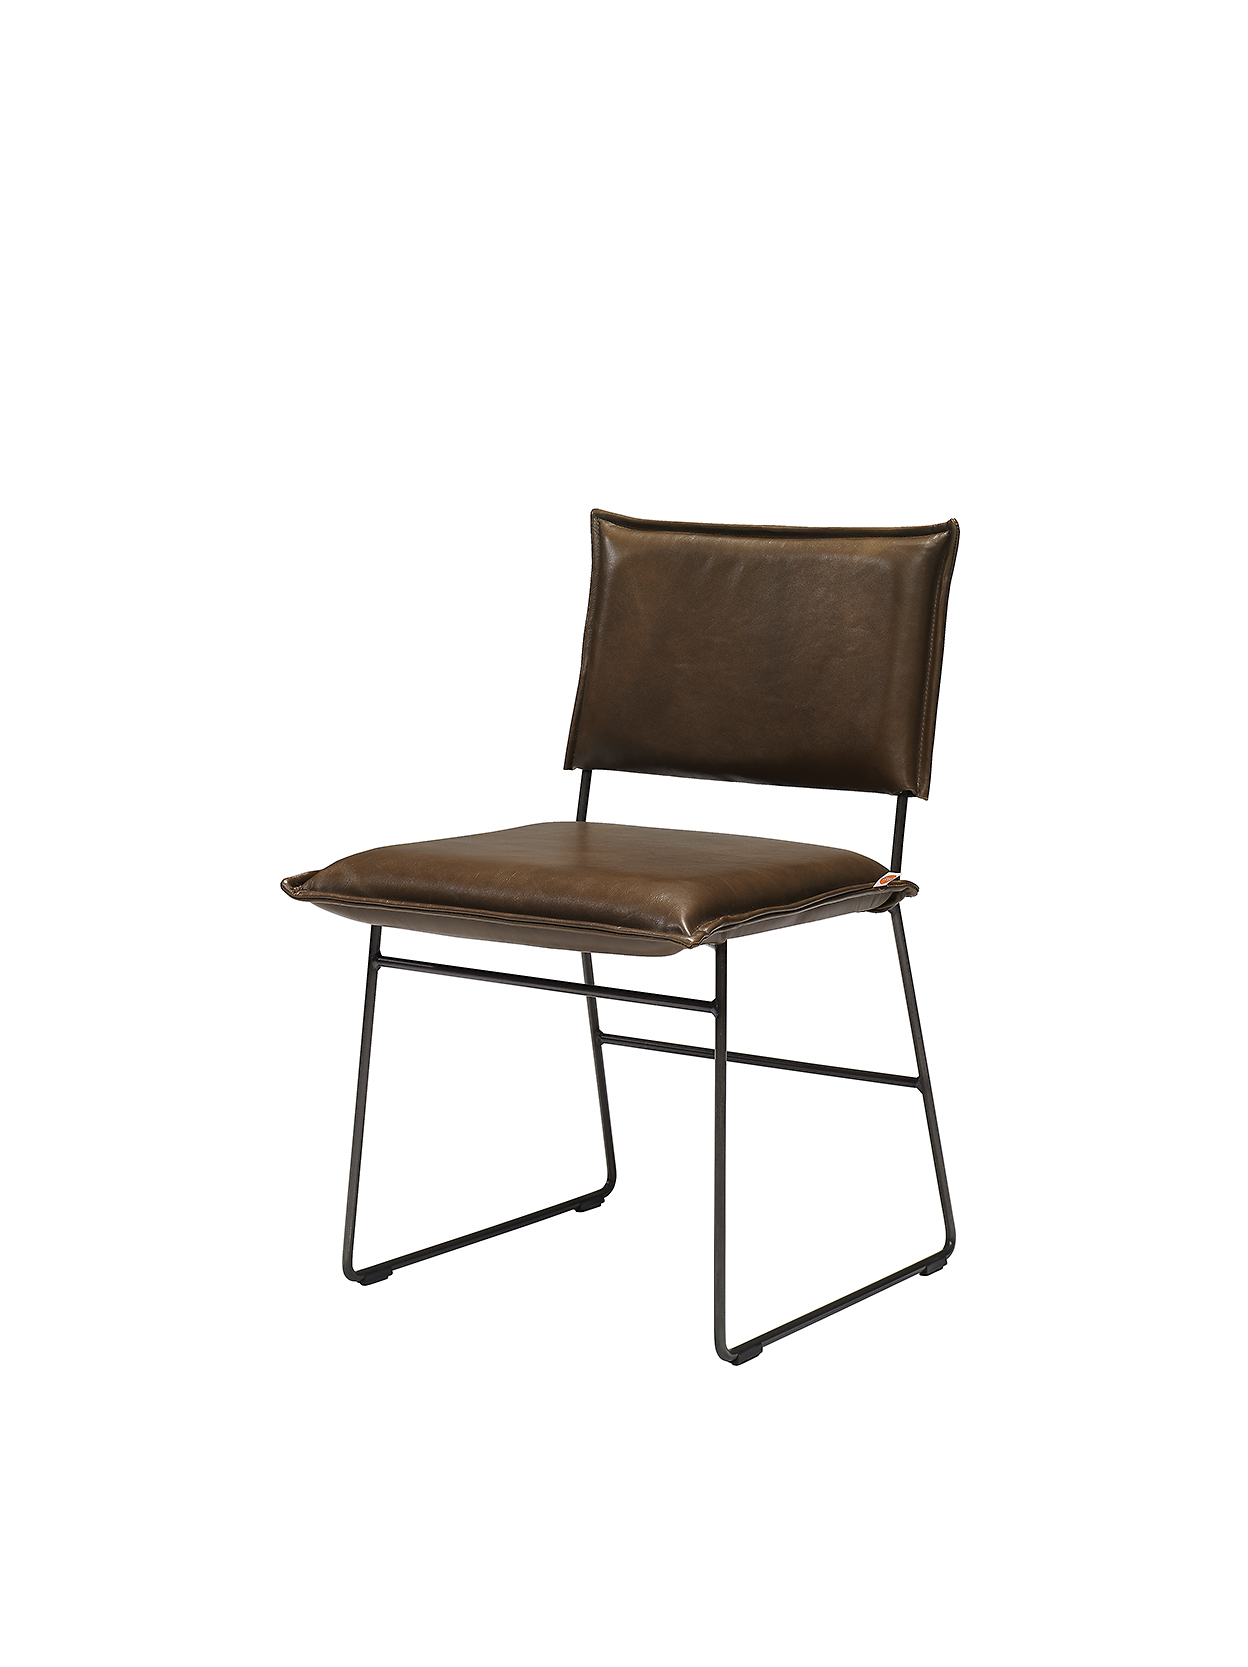 Norman Chair Without Arm Luxor Fango Pers LR ZS 8720153744461